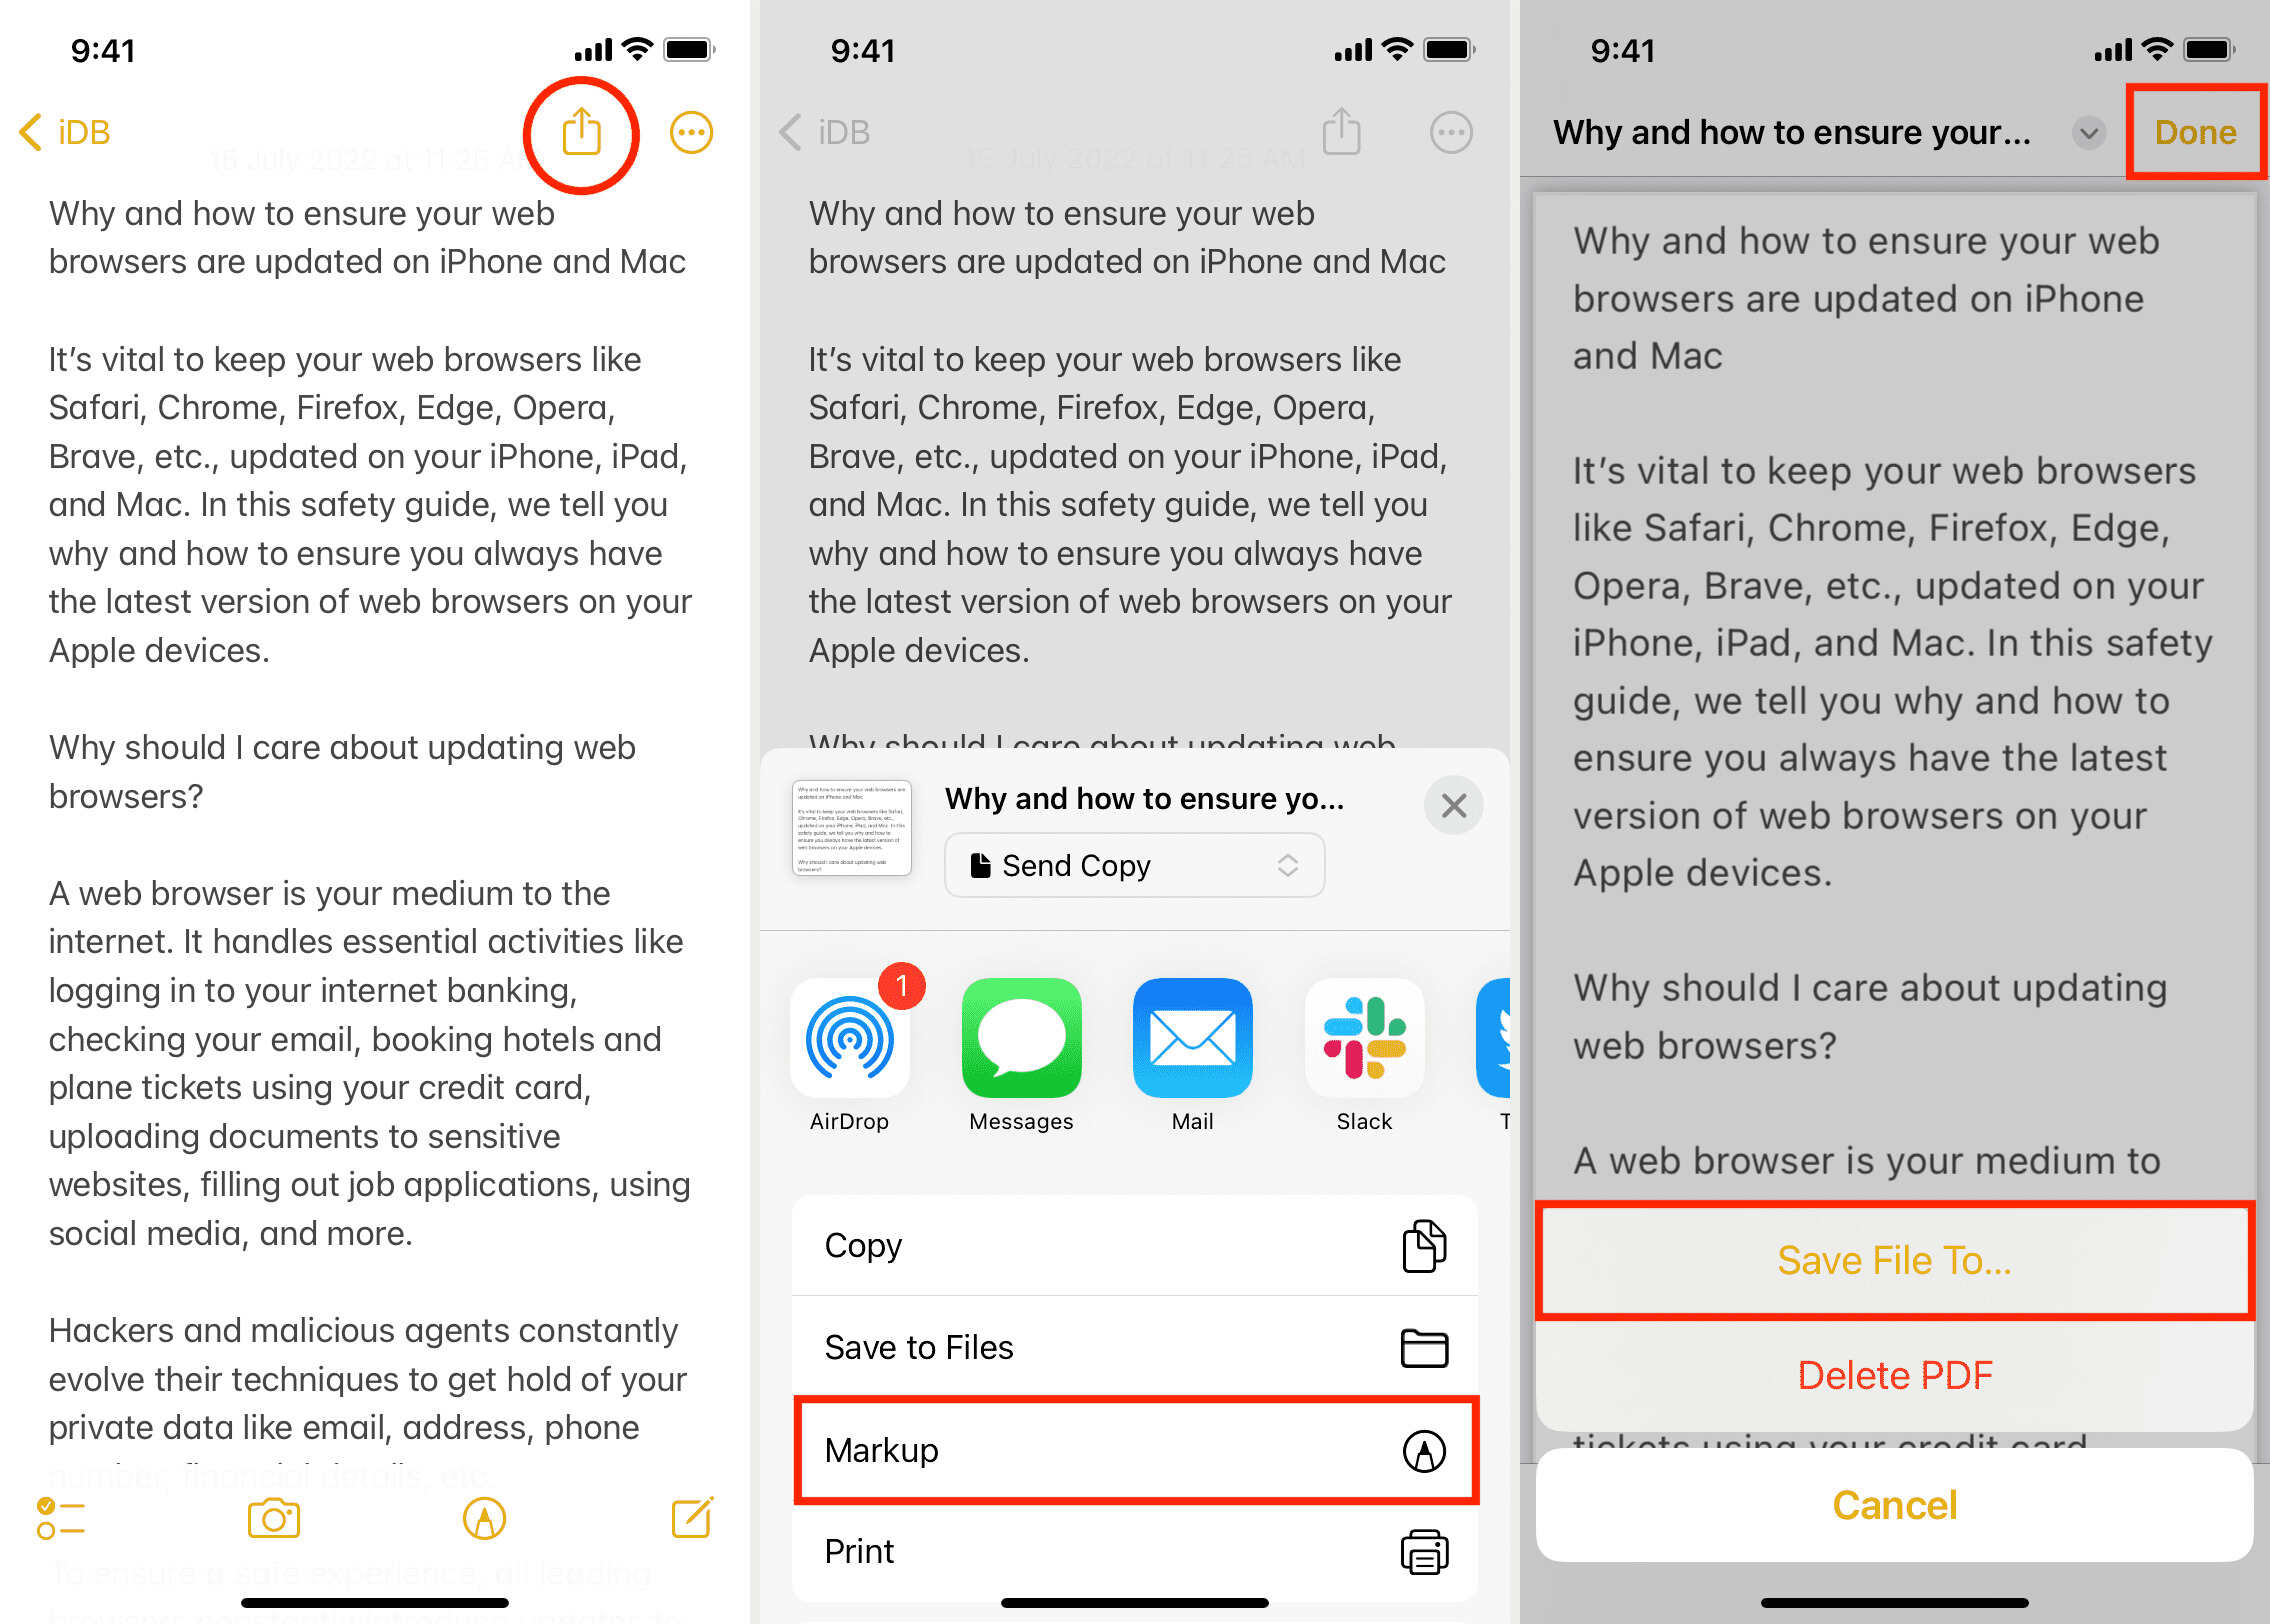 how-to-create-pdf-on-iphone-from-notes-10-faqs-about-notes-app